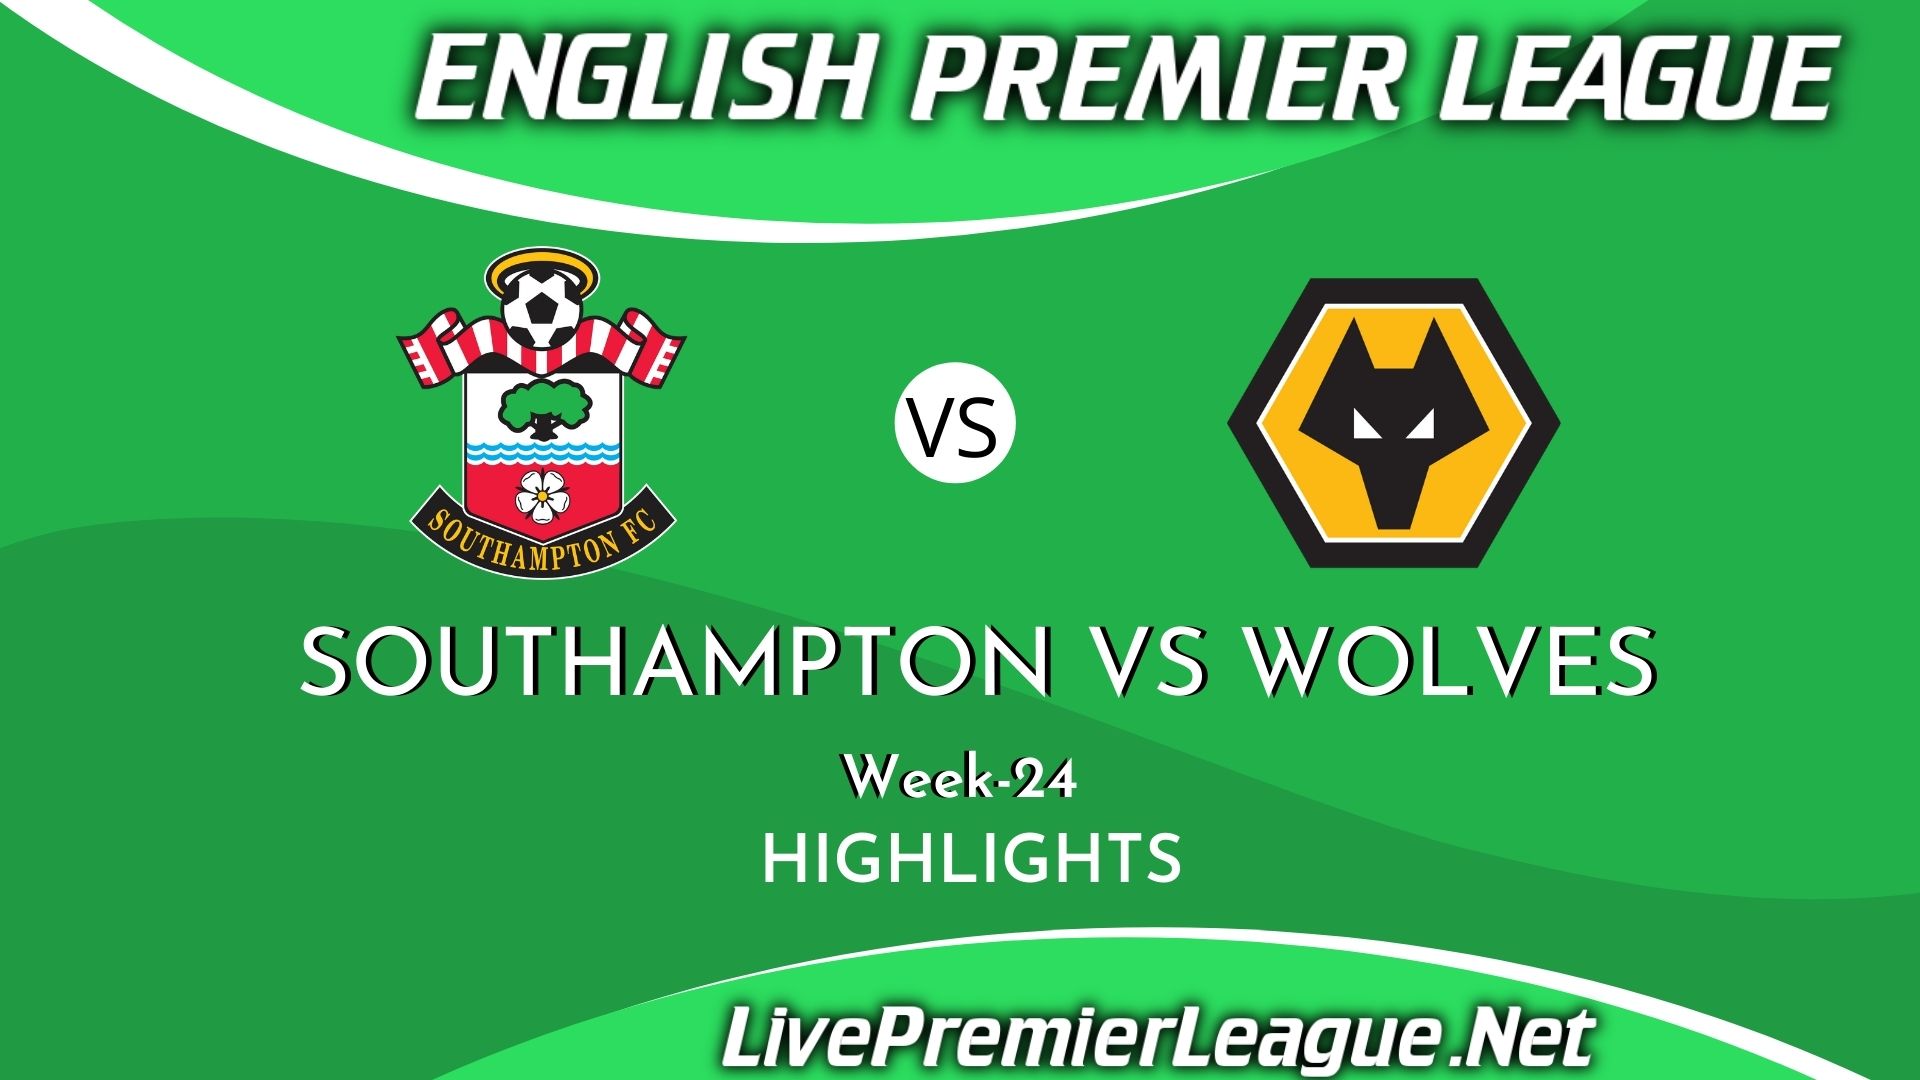 Southampton Vs Wolves Extended Highlights 2021 EPL Week 24